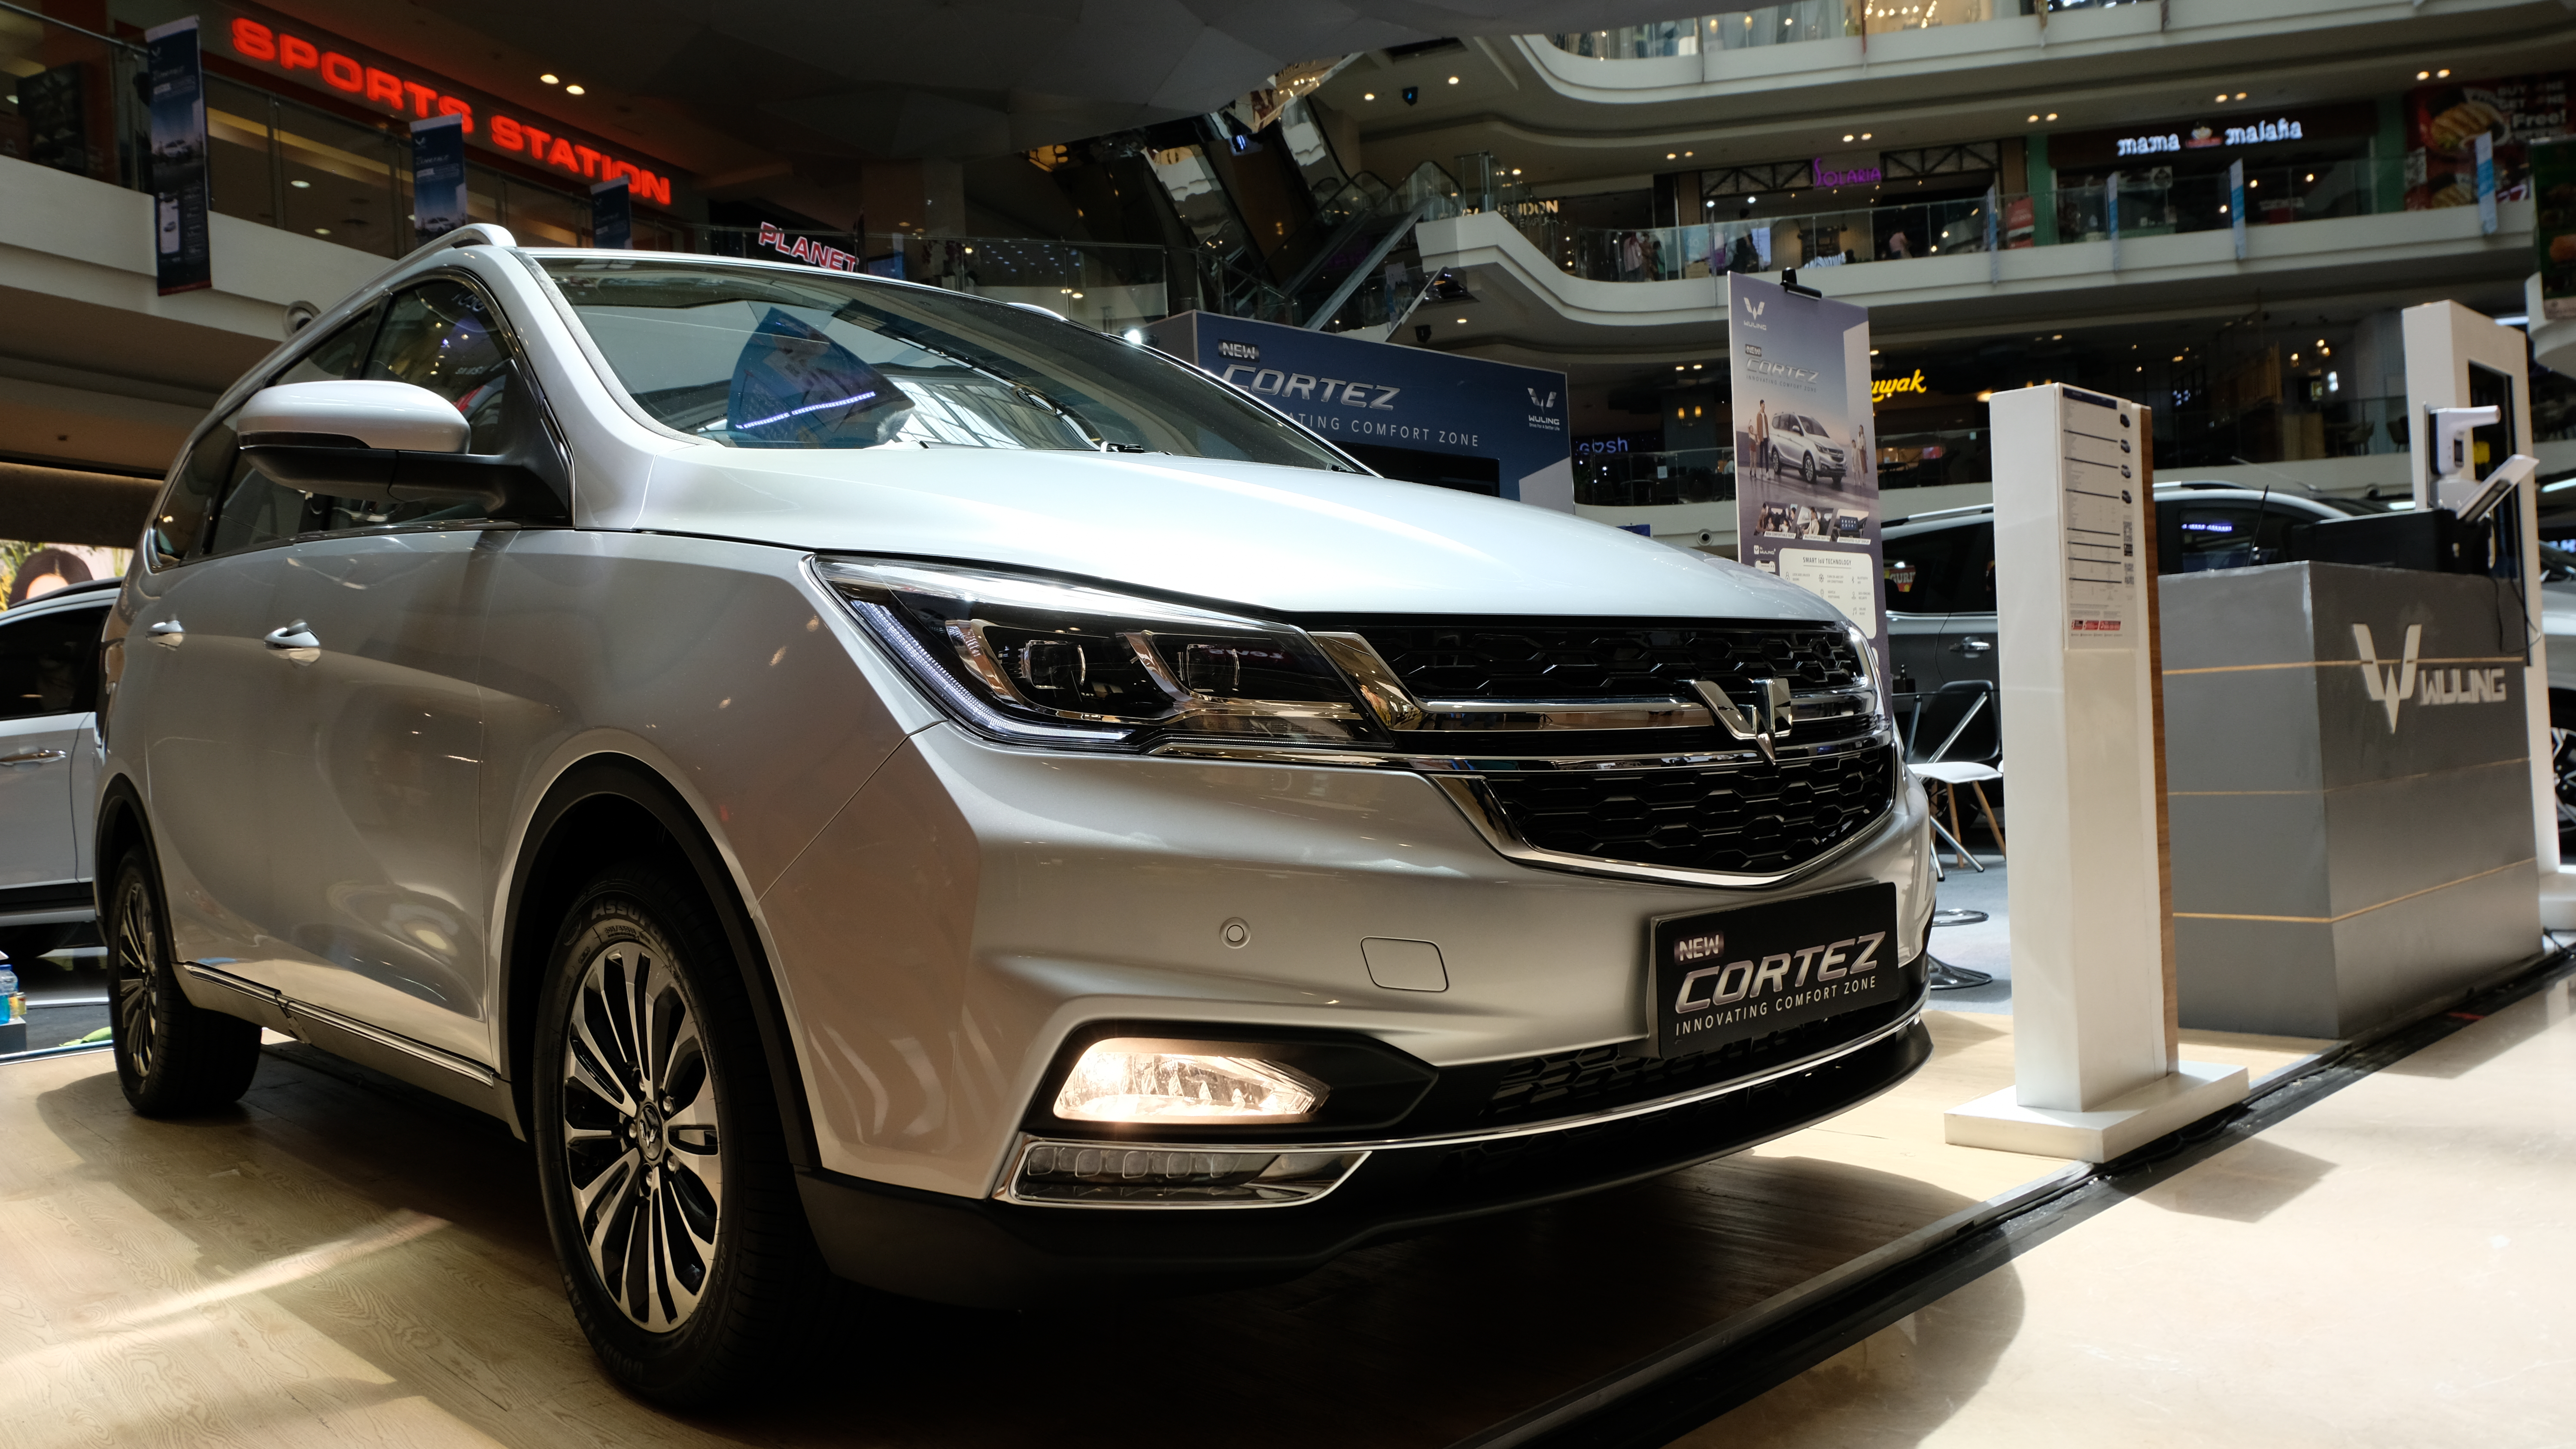 Image Wuling New Cortez Officially Greets Consumers in Semarang